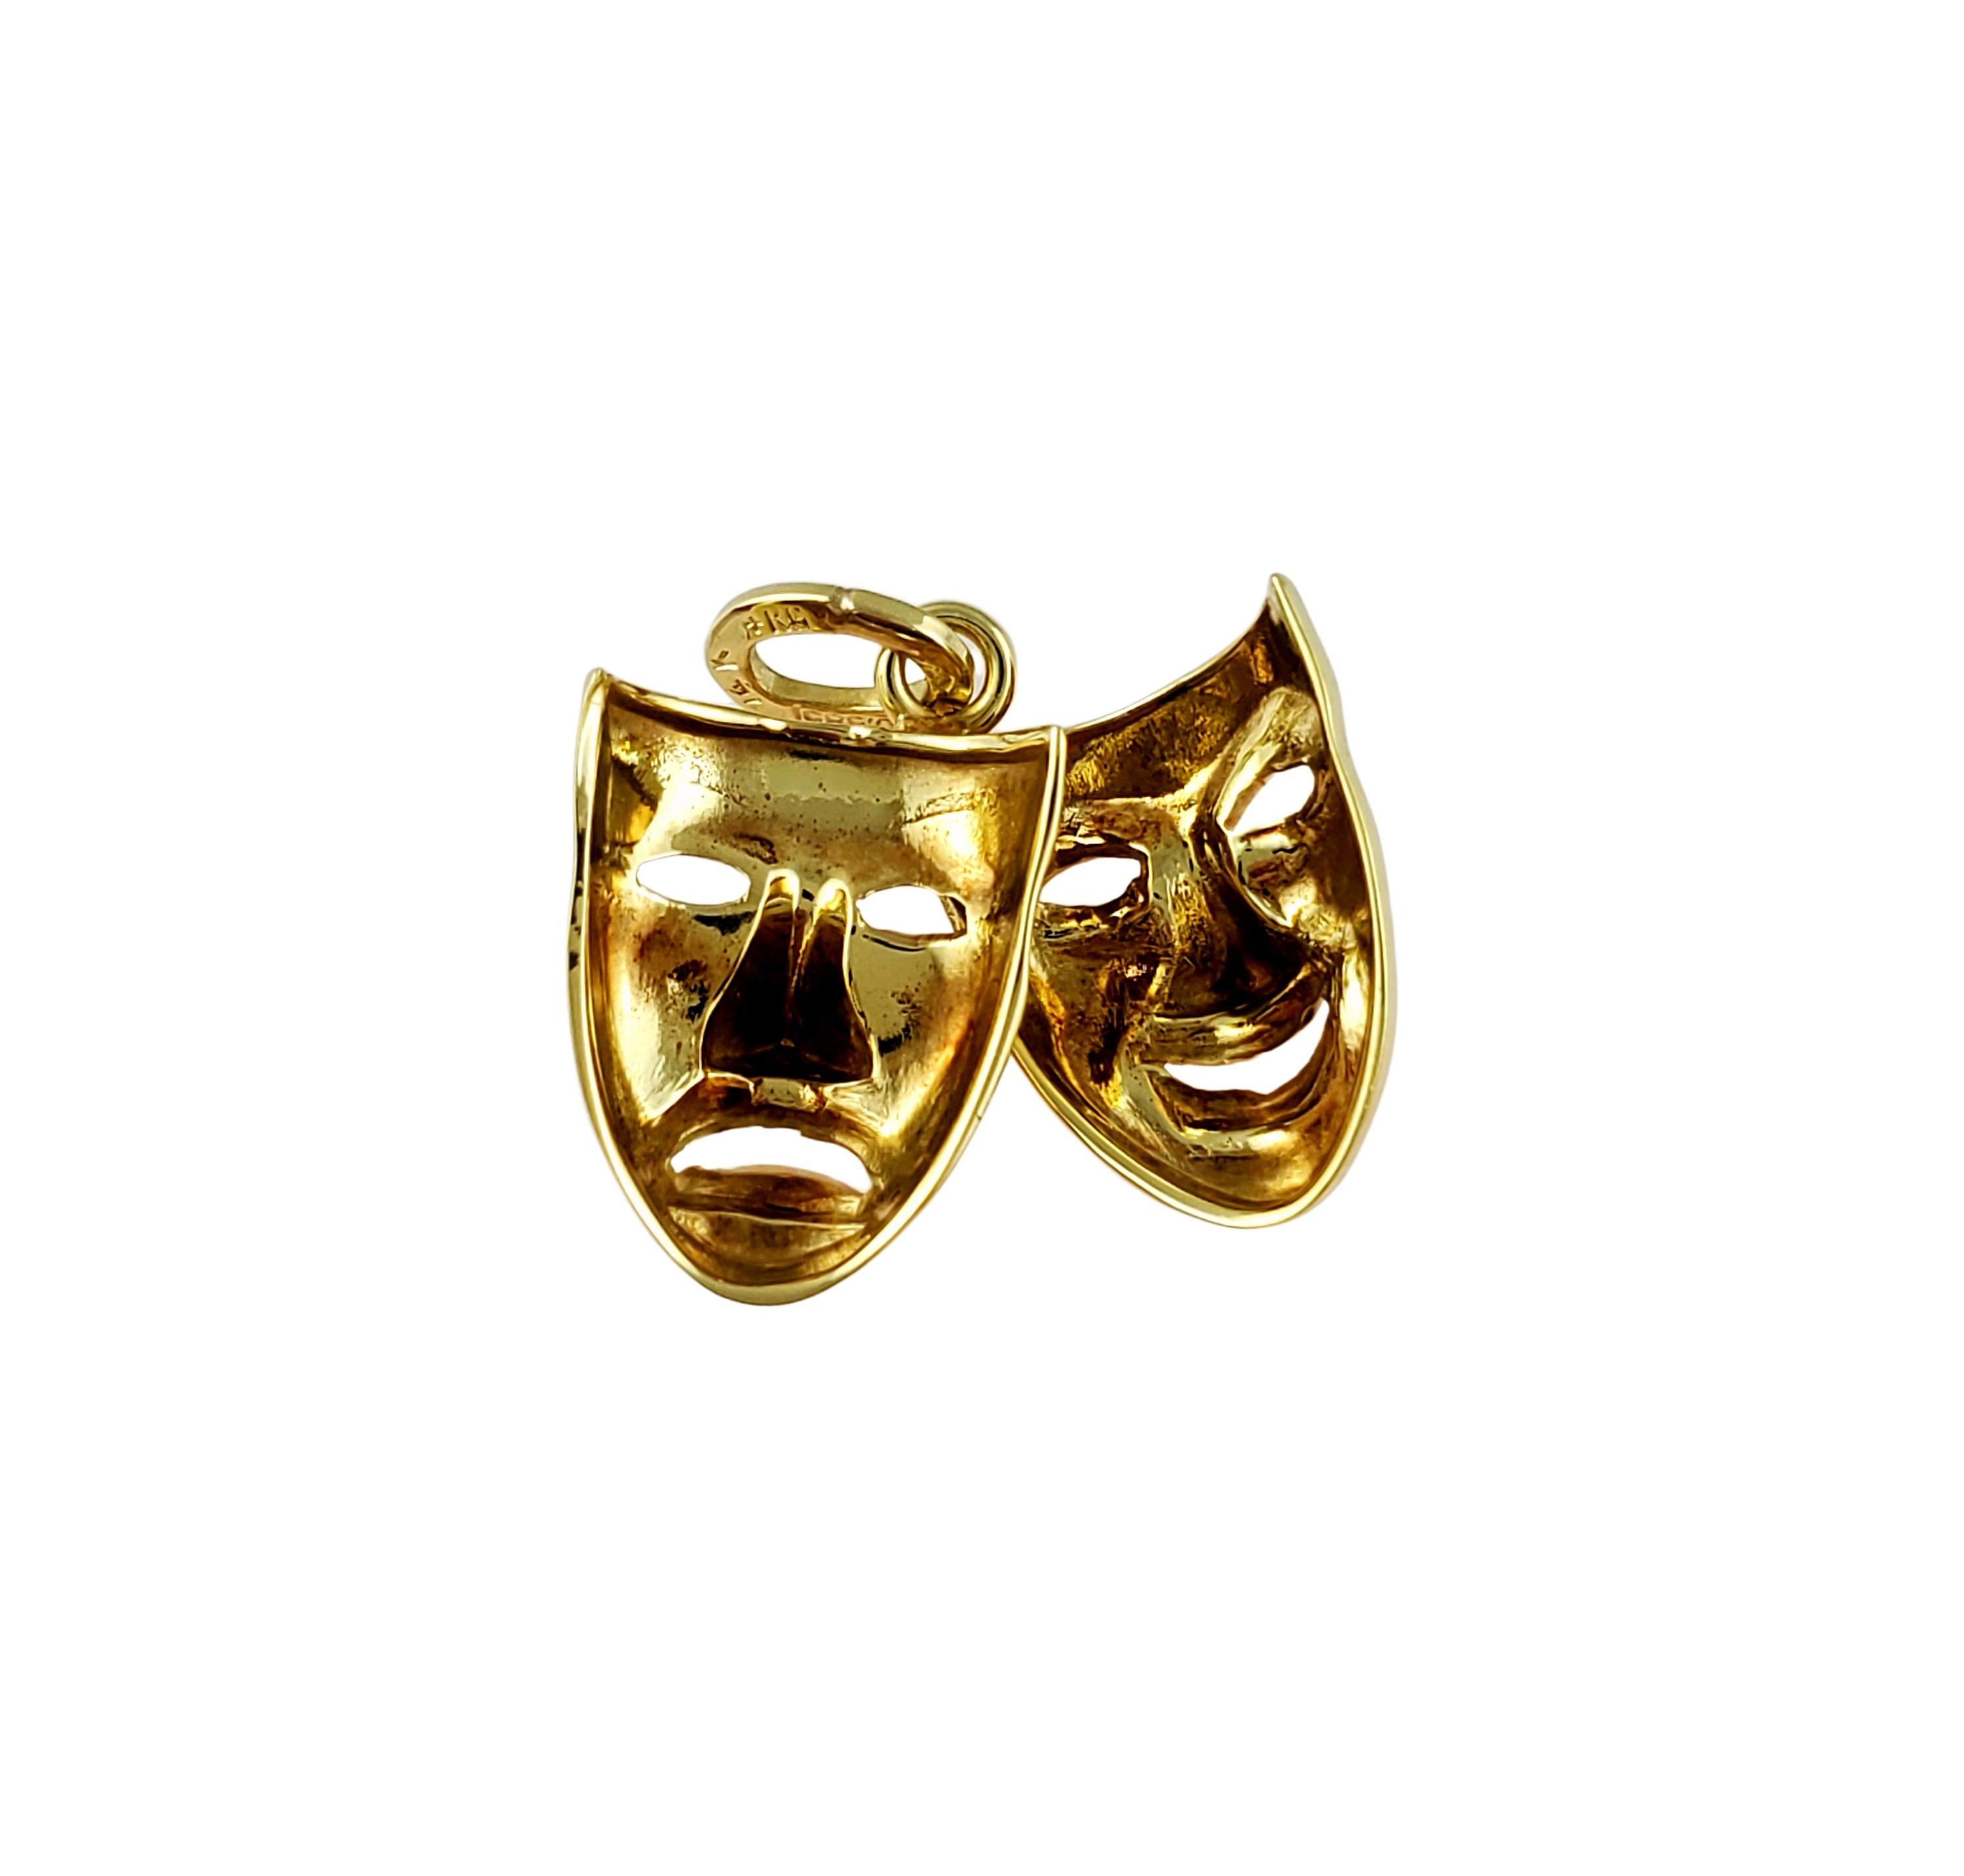 14K Yellow Gold Tragedy & Comedy Mask Charm

Beautiful 14K yellow gold tragedy & comedy mask charm depicts happy and sad emotions. These masks are used in the representation of theater, acting, and drama. These exaggerated emotion masks were used in